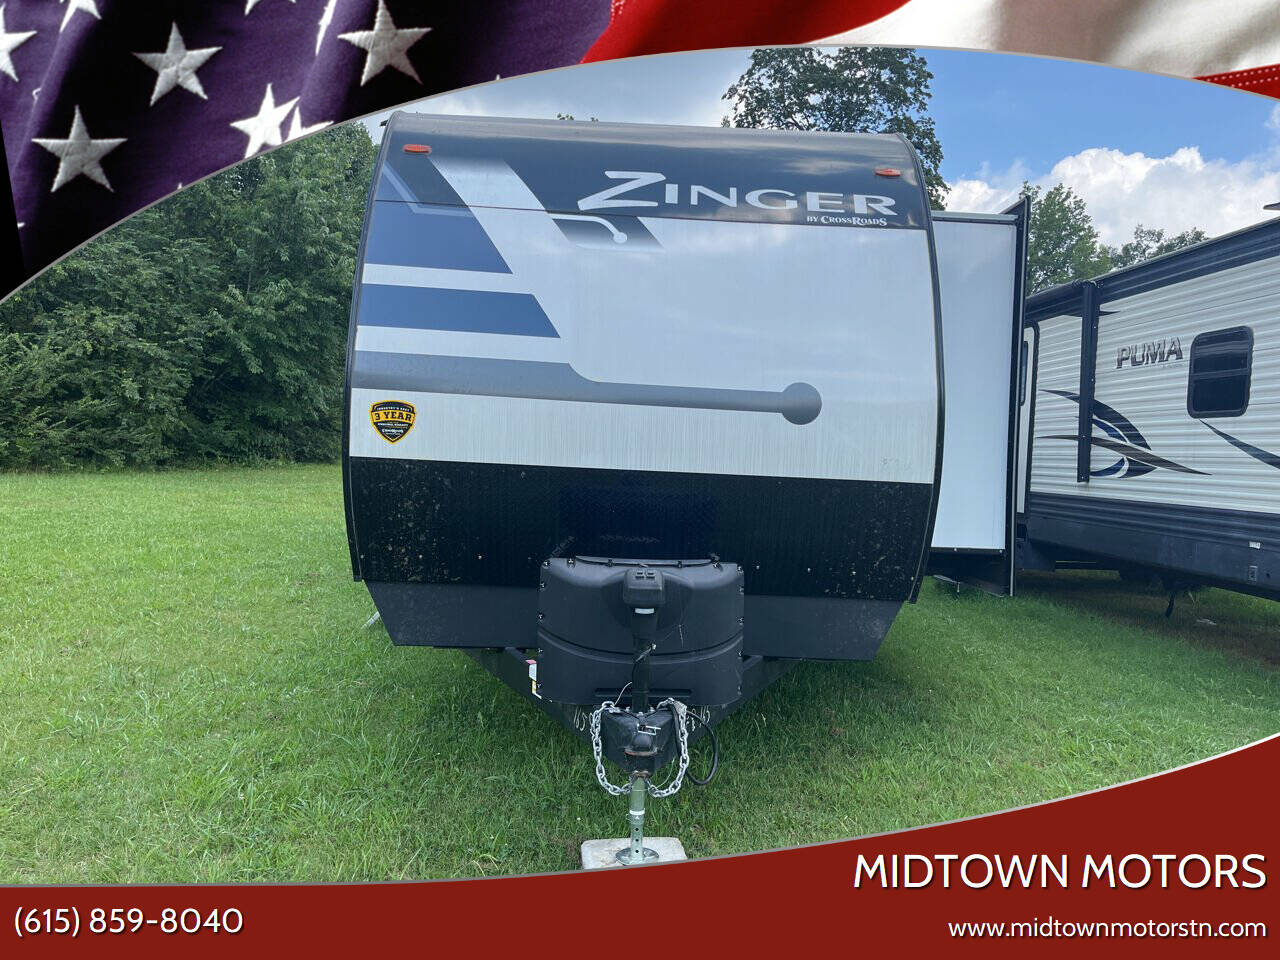 RVs & Campers For Sale In Old Hickory, TN - Carsforsale.com®